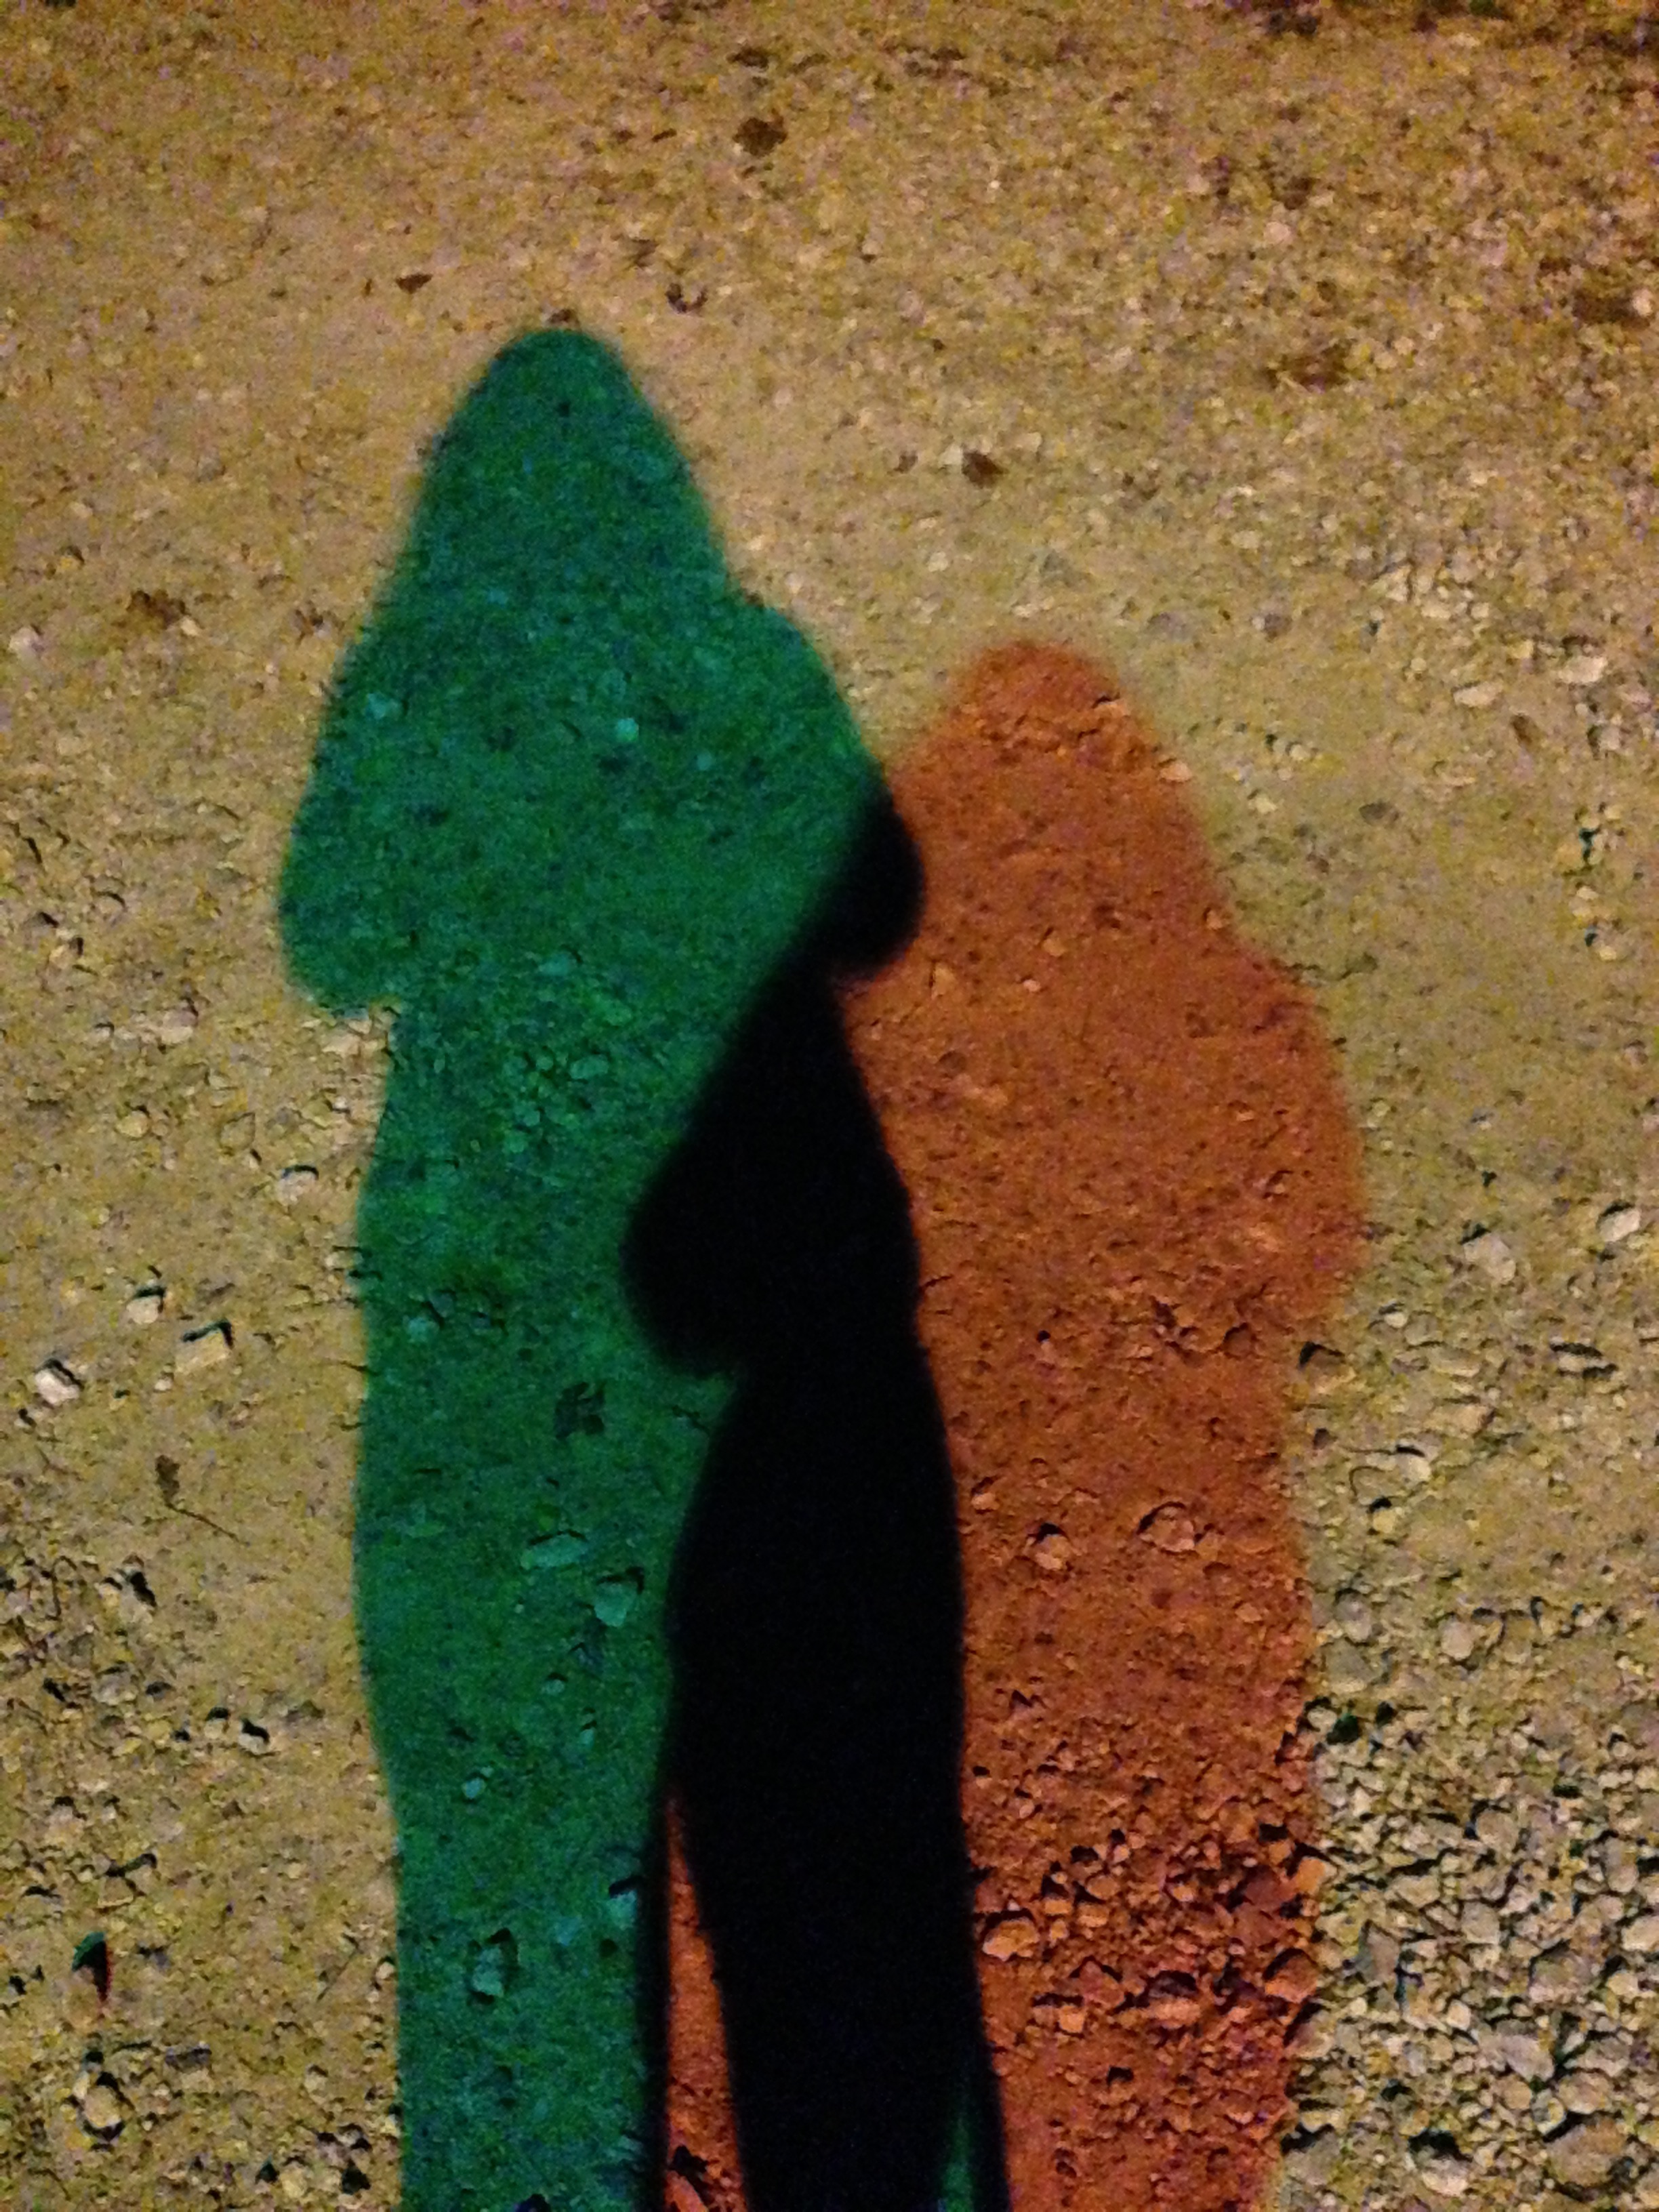 colored-shadows: two different colors of light cause two colors of shadow